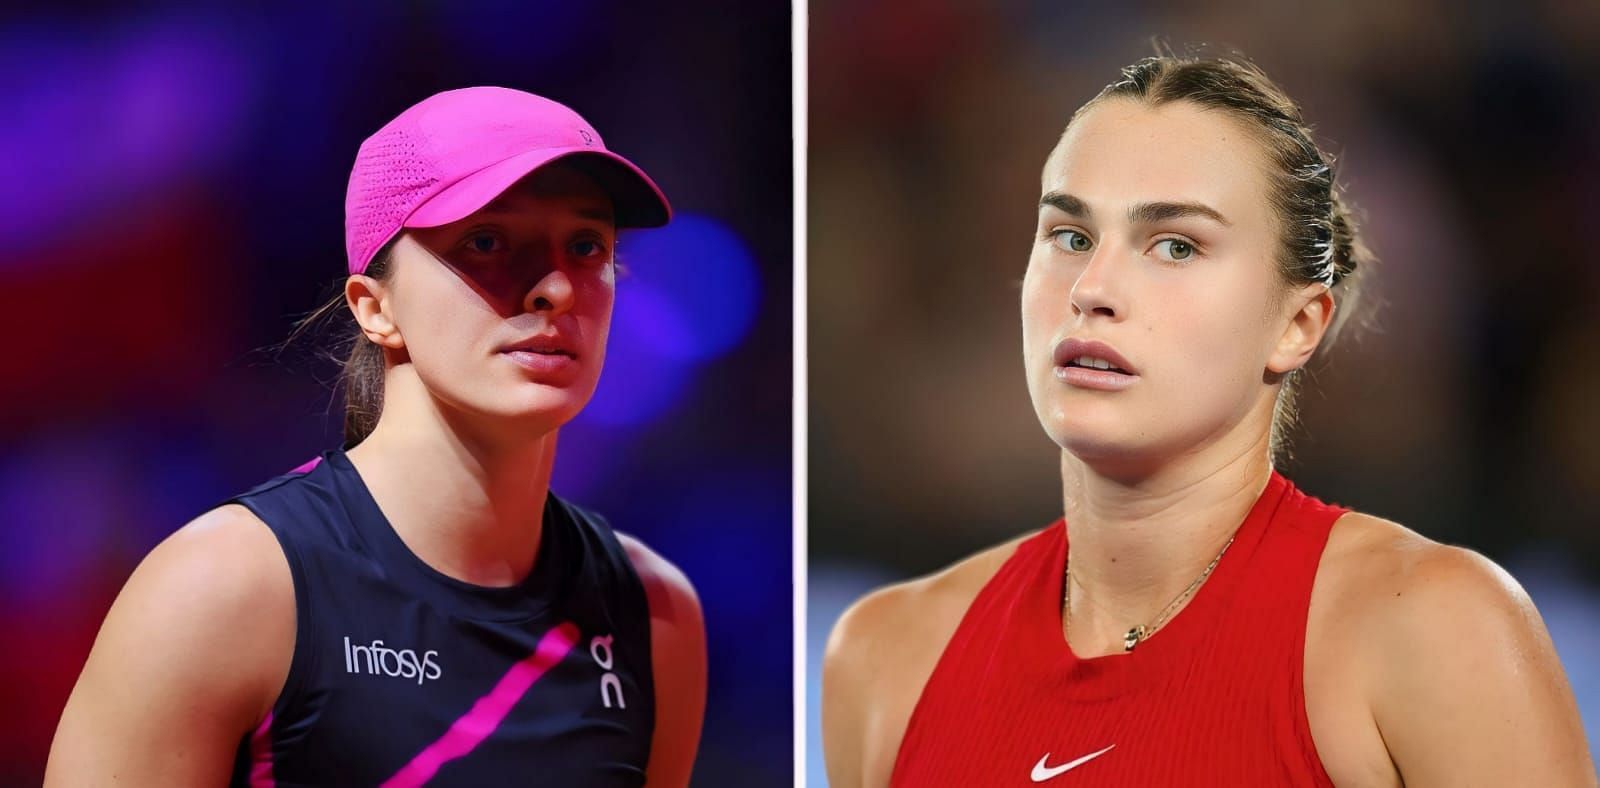 WATCH: Iga Swiatek shrieks in surprise after Aryna Sabalenka almost hits on her on the body with powerful smash during Italian Open final